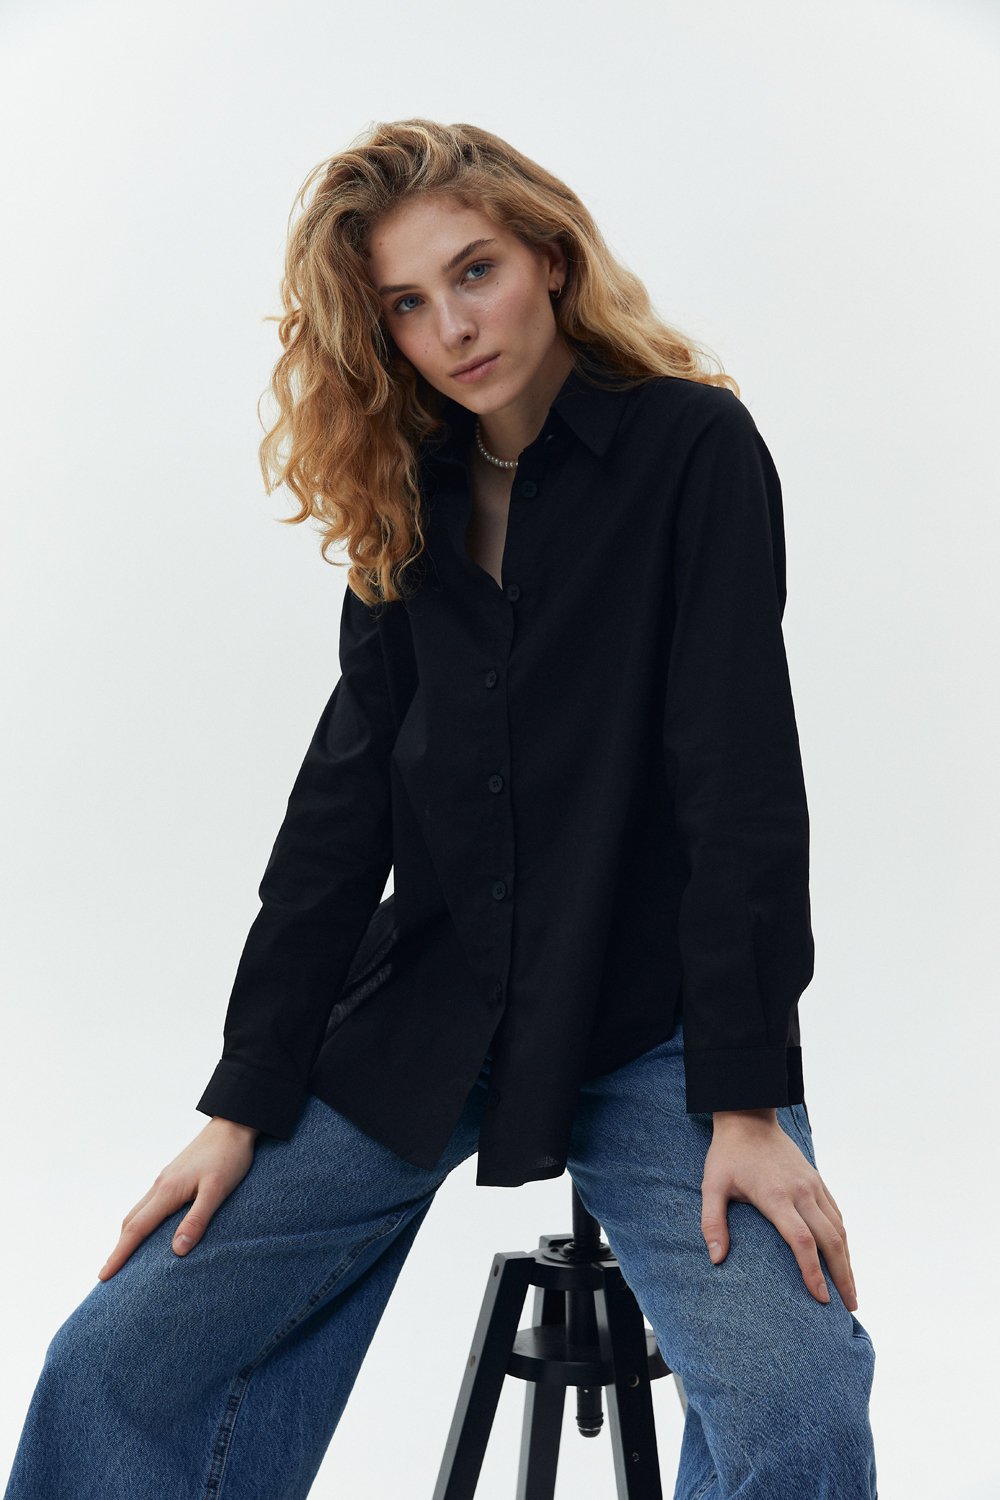 Black cotton shirt with functional buttons on the sides